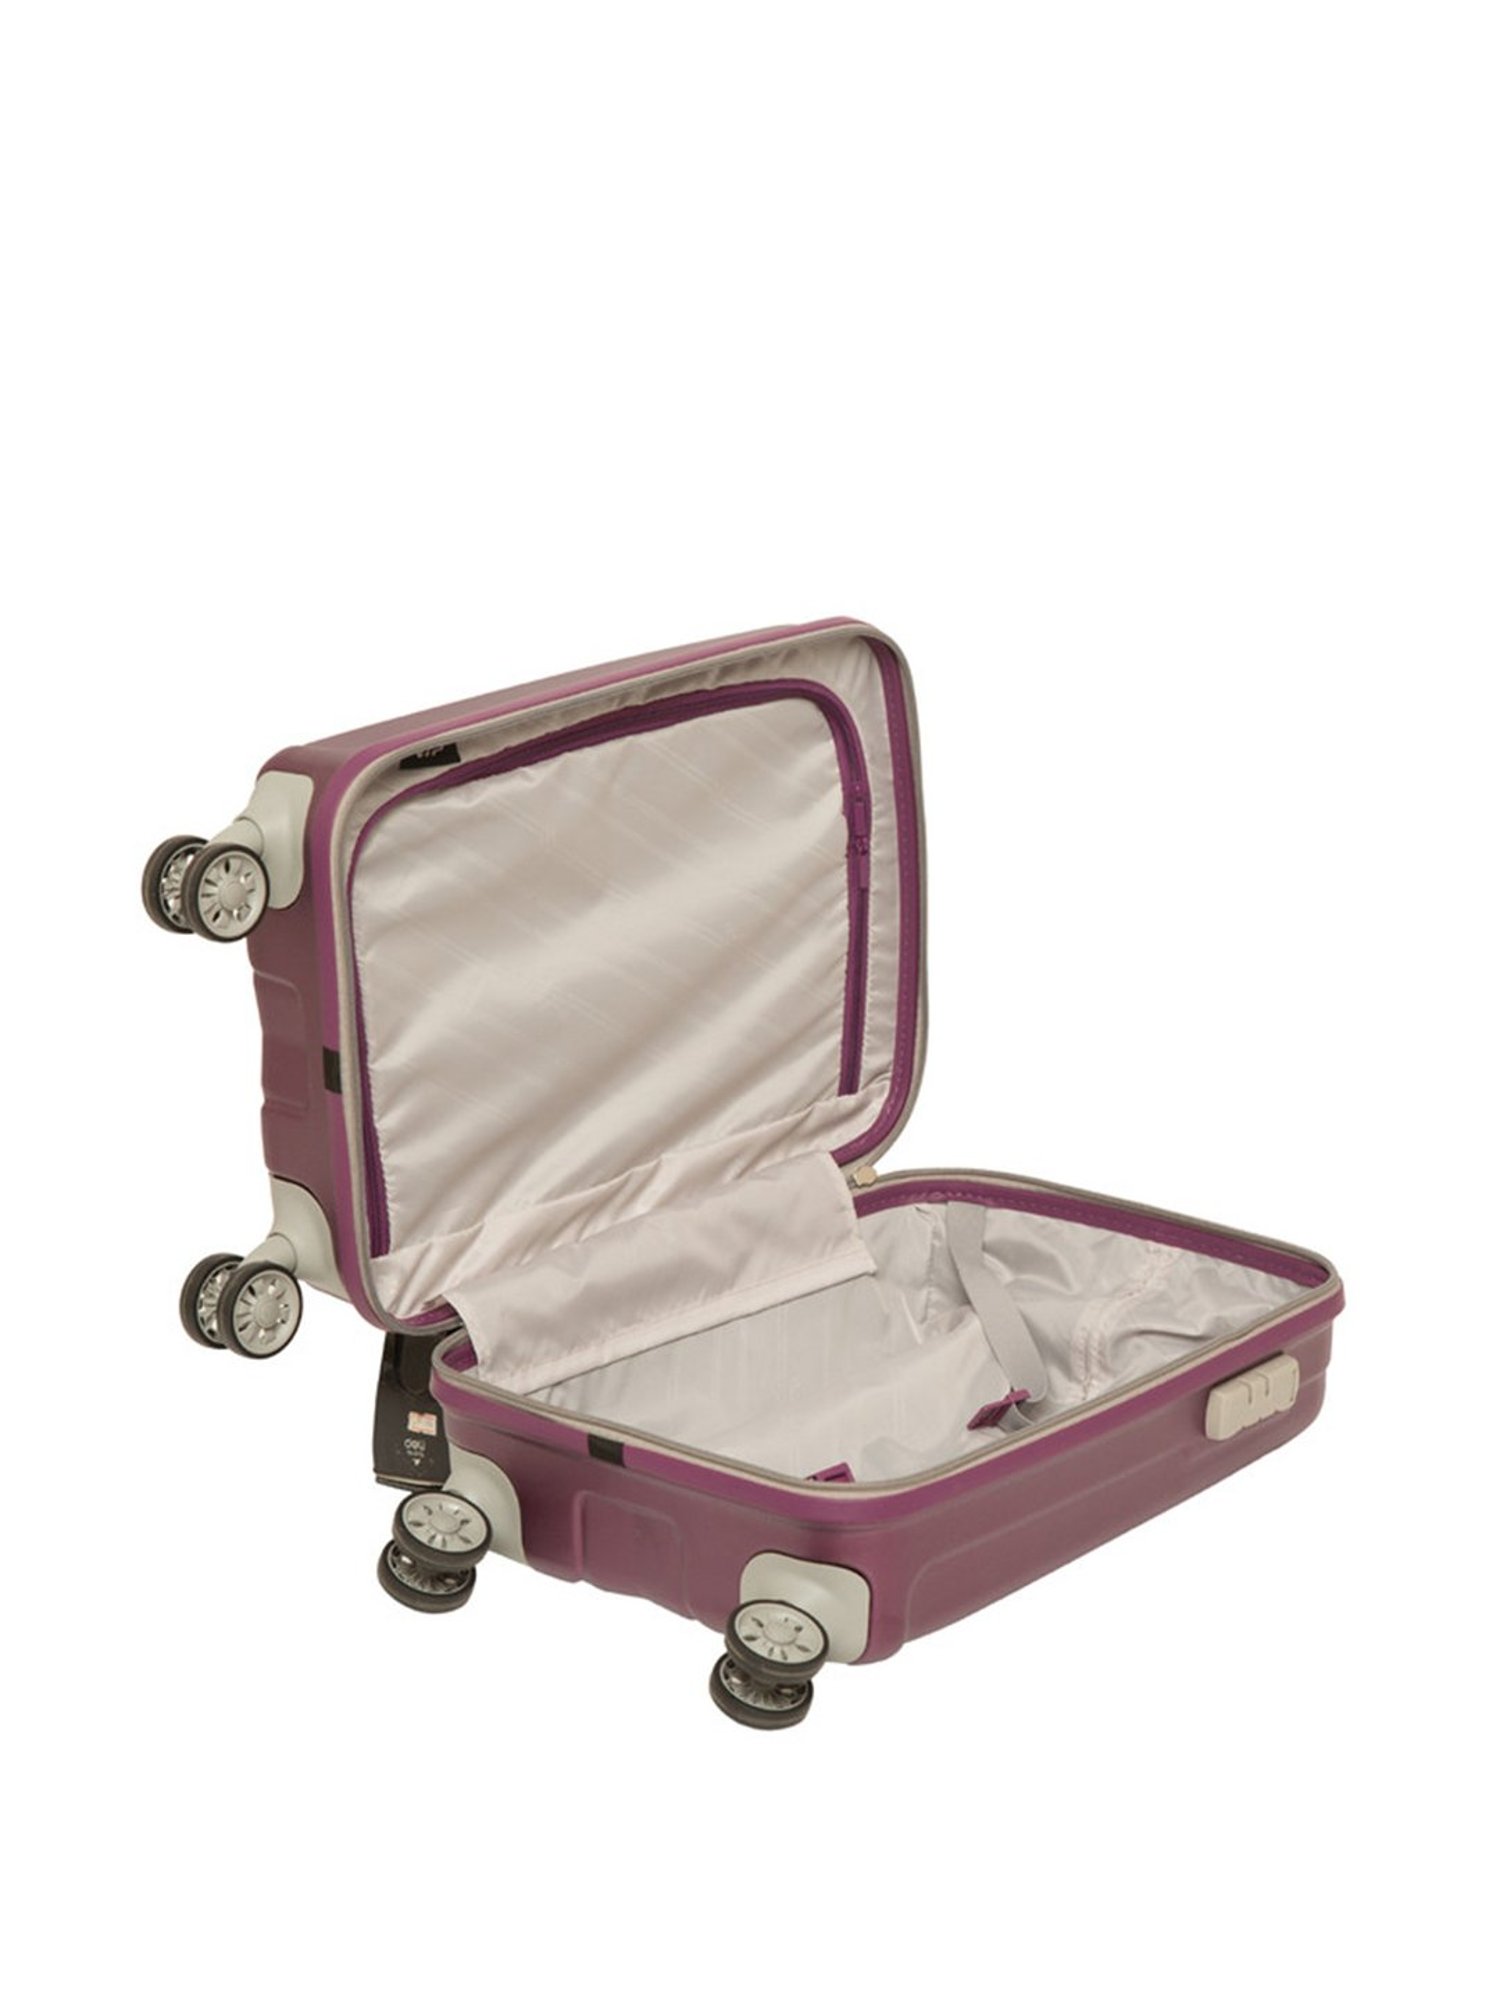 Buy Citizen Journey Pulse Trolley Bag for Travel 78 cms Large Check-in Luggage  Bag | Polyester Soft Sided Suitcase for Travel with 4 Spinner Wheel &  Built-in Combination Lock (Purple) Online at